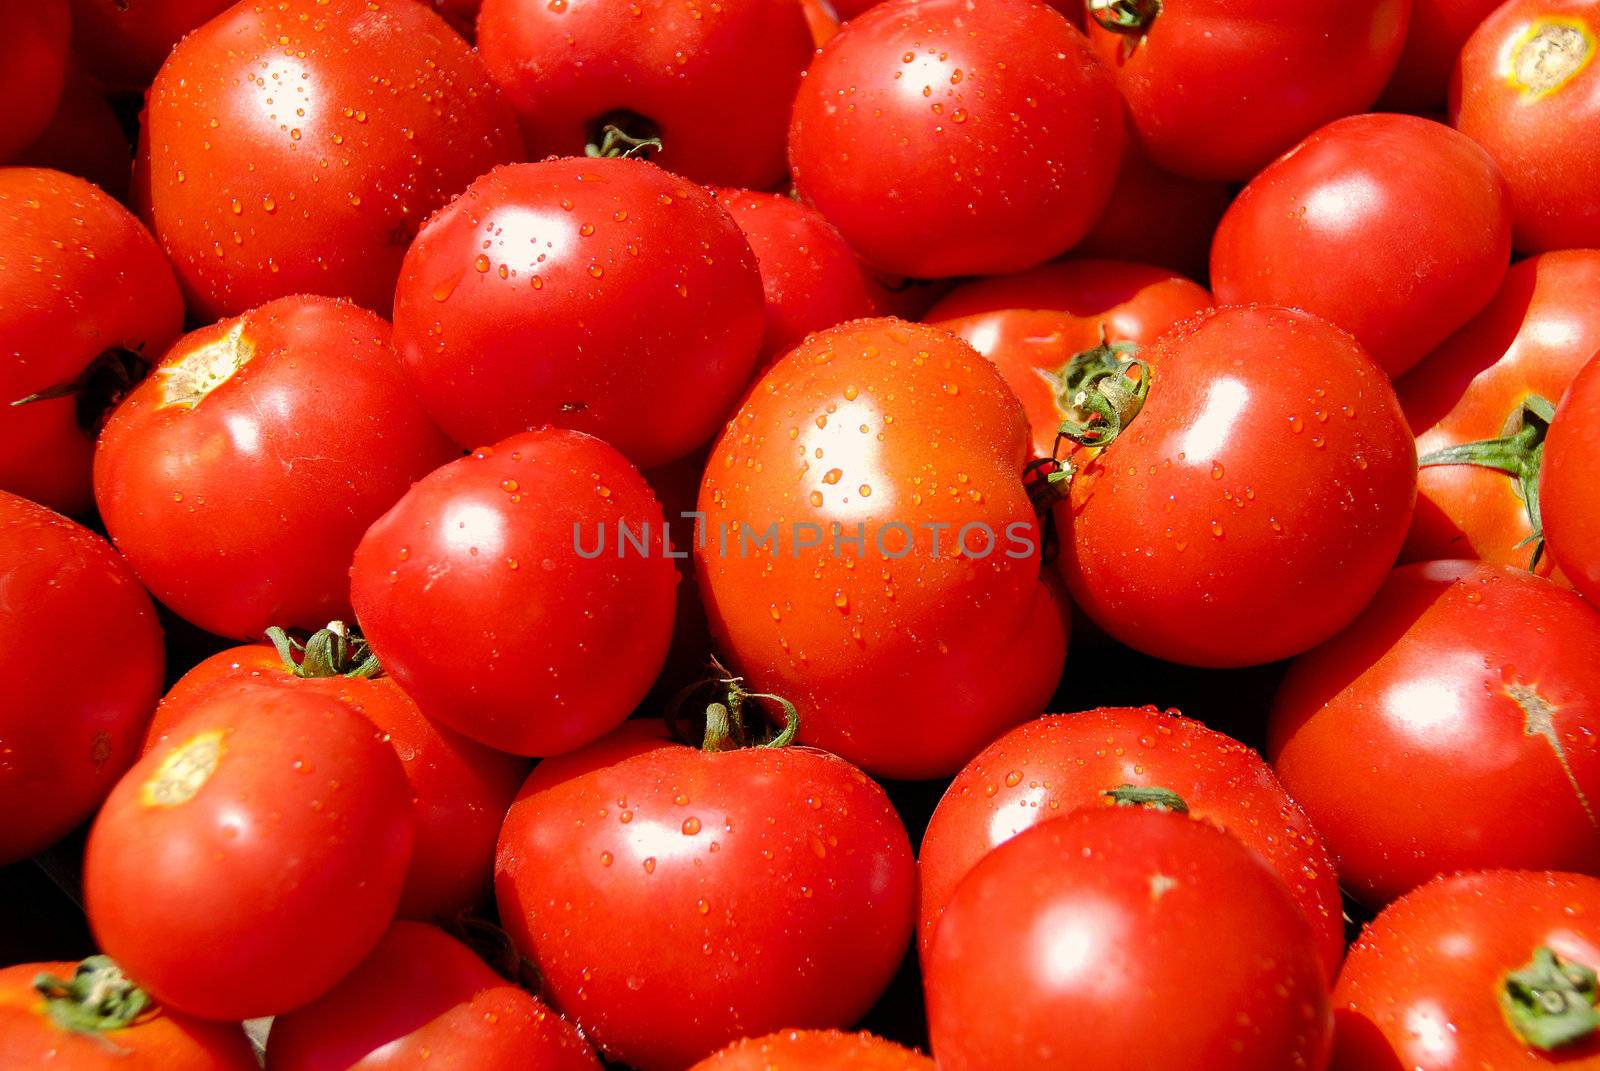 A pile of dewily red tomatoes